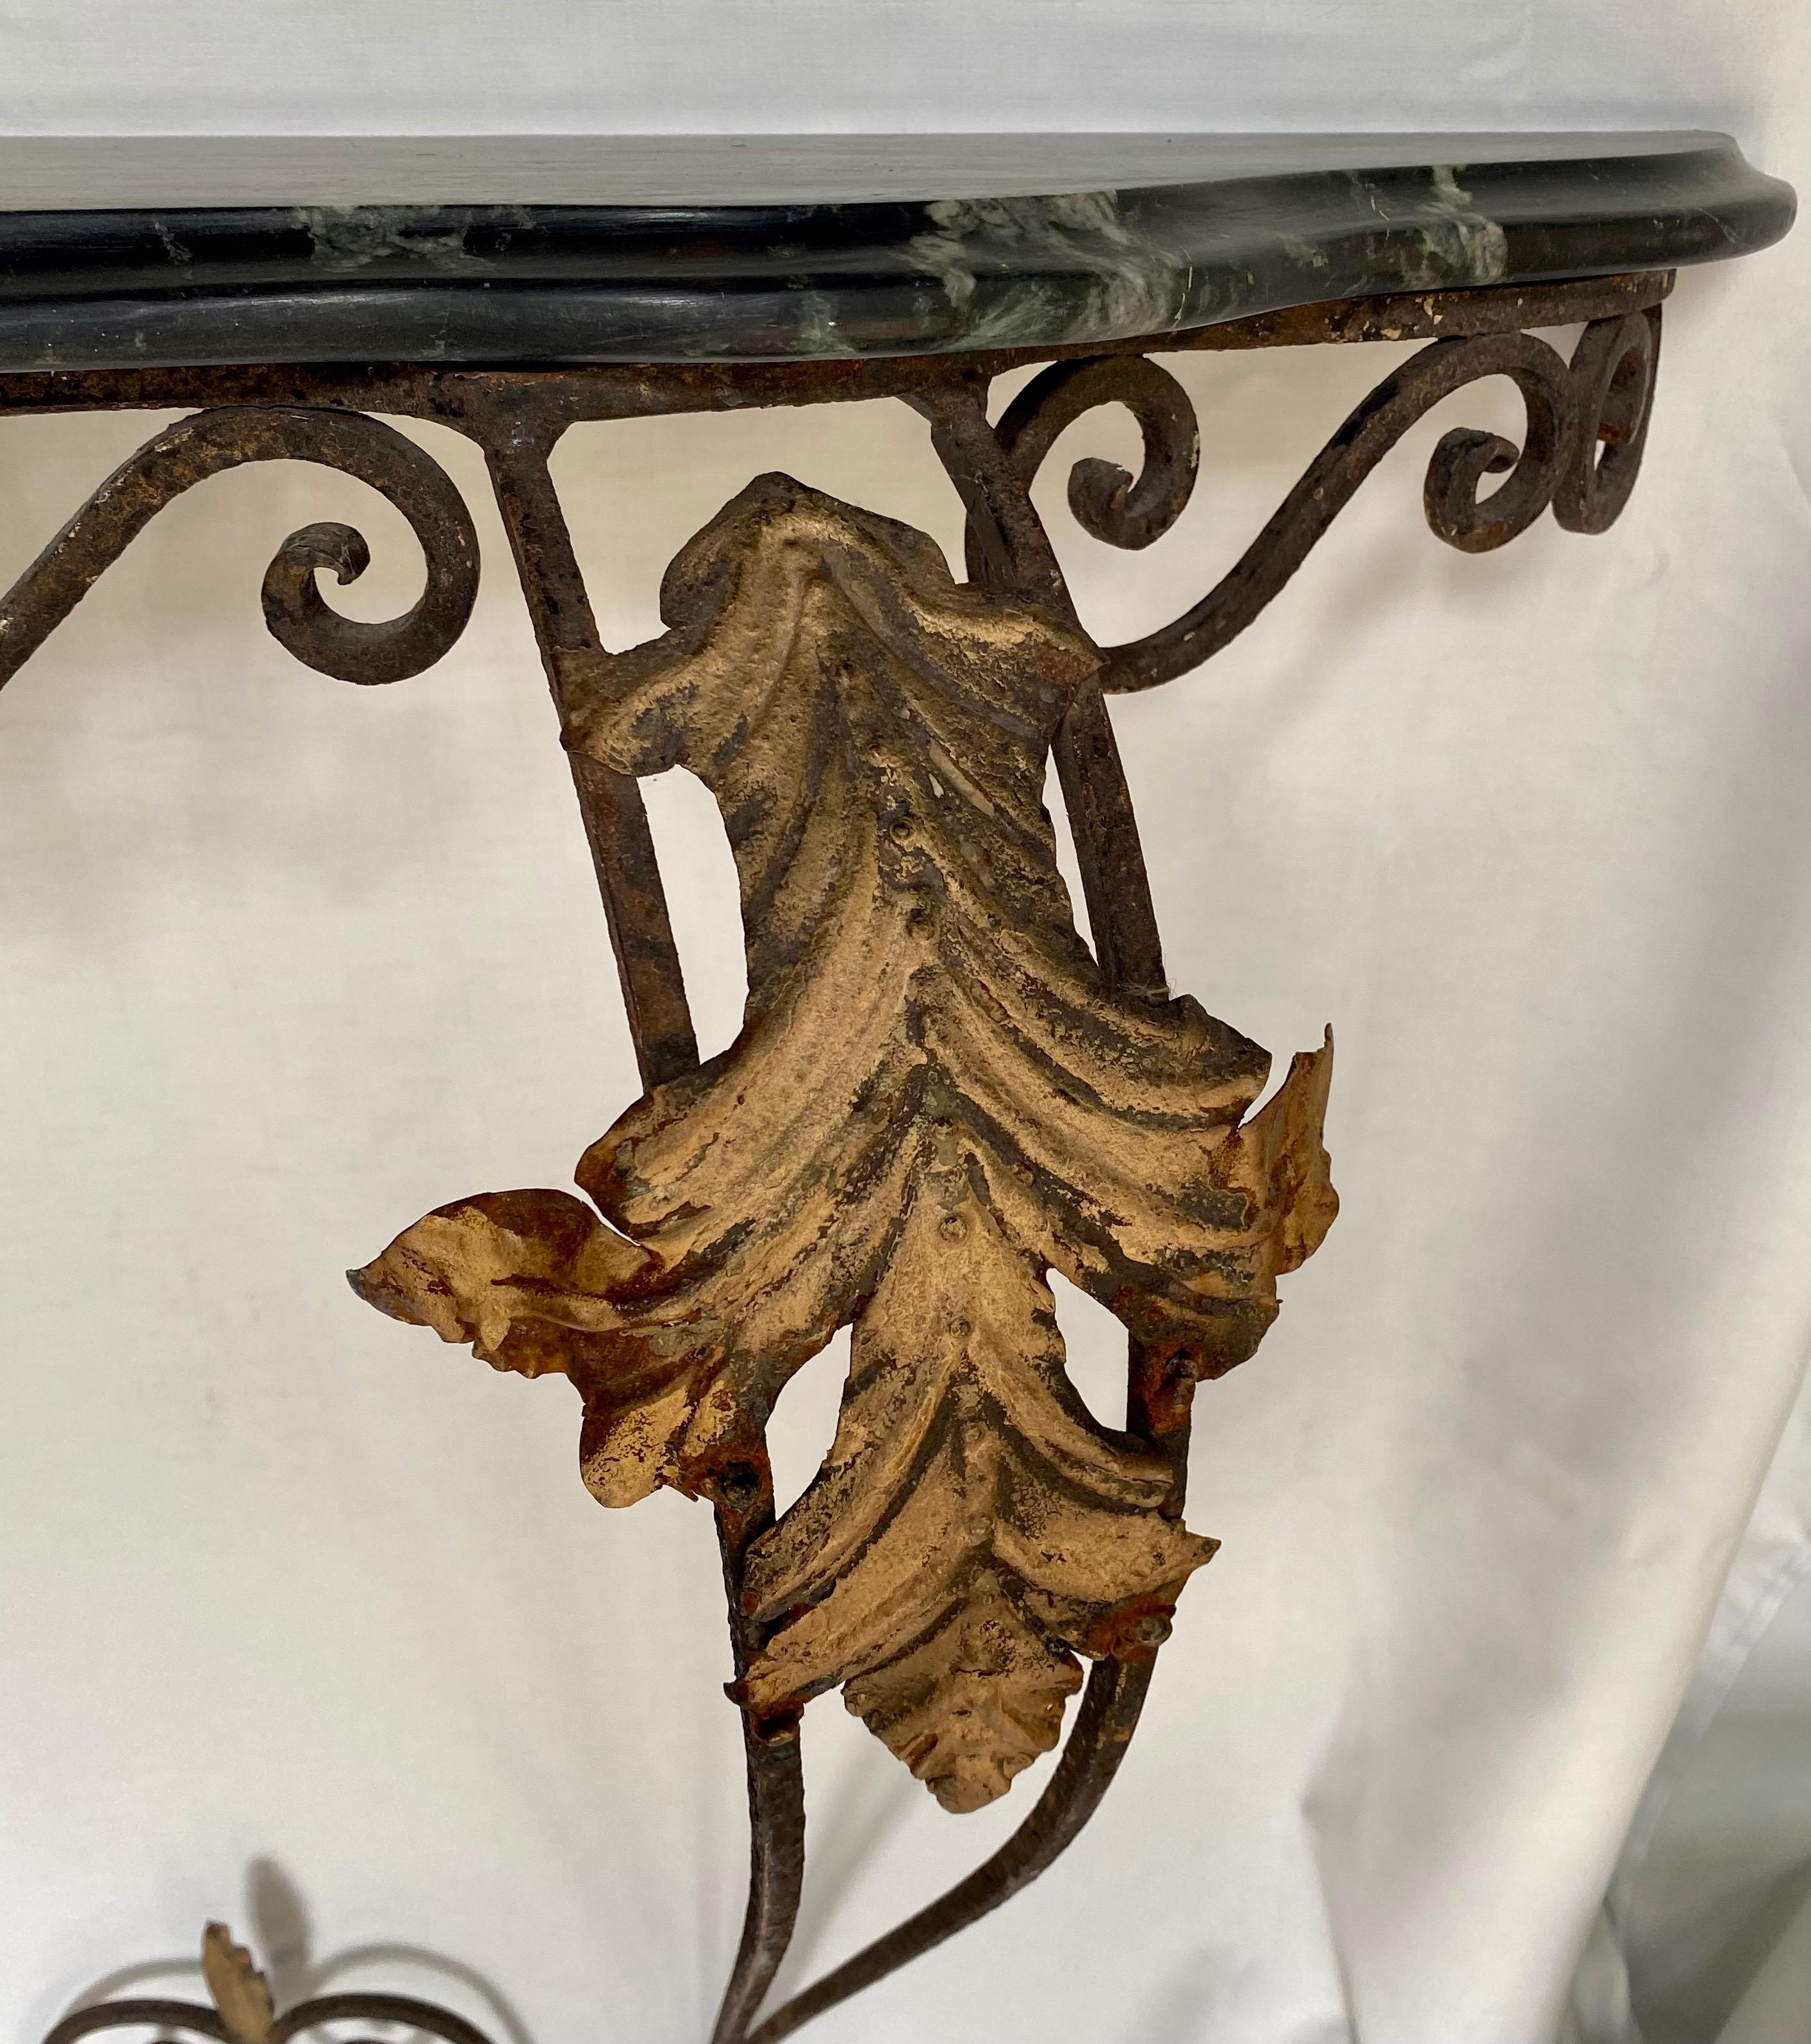 Sculptural Rococo style wall mount wrought iron console table with gilt metal leaf and scroll decoration. This beautiful entry hall table comes with a removable beveled black veined marble serpentine marble top. Table base mounts to wall by two